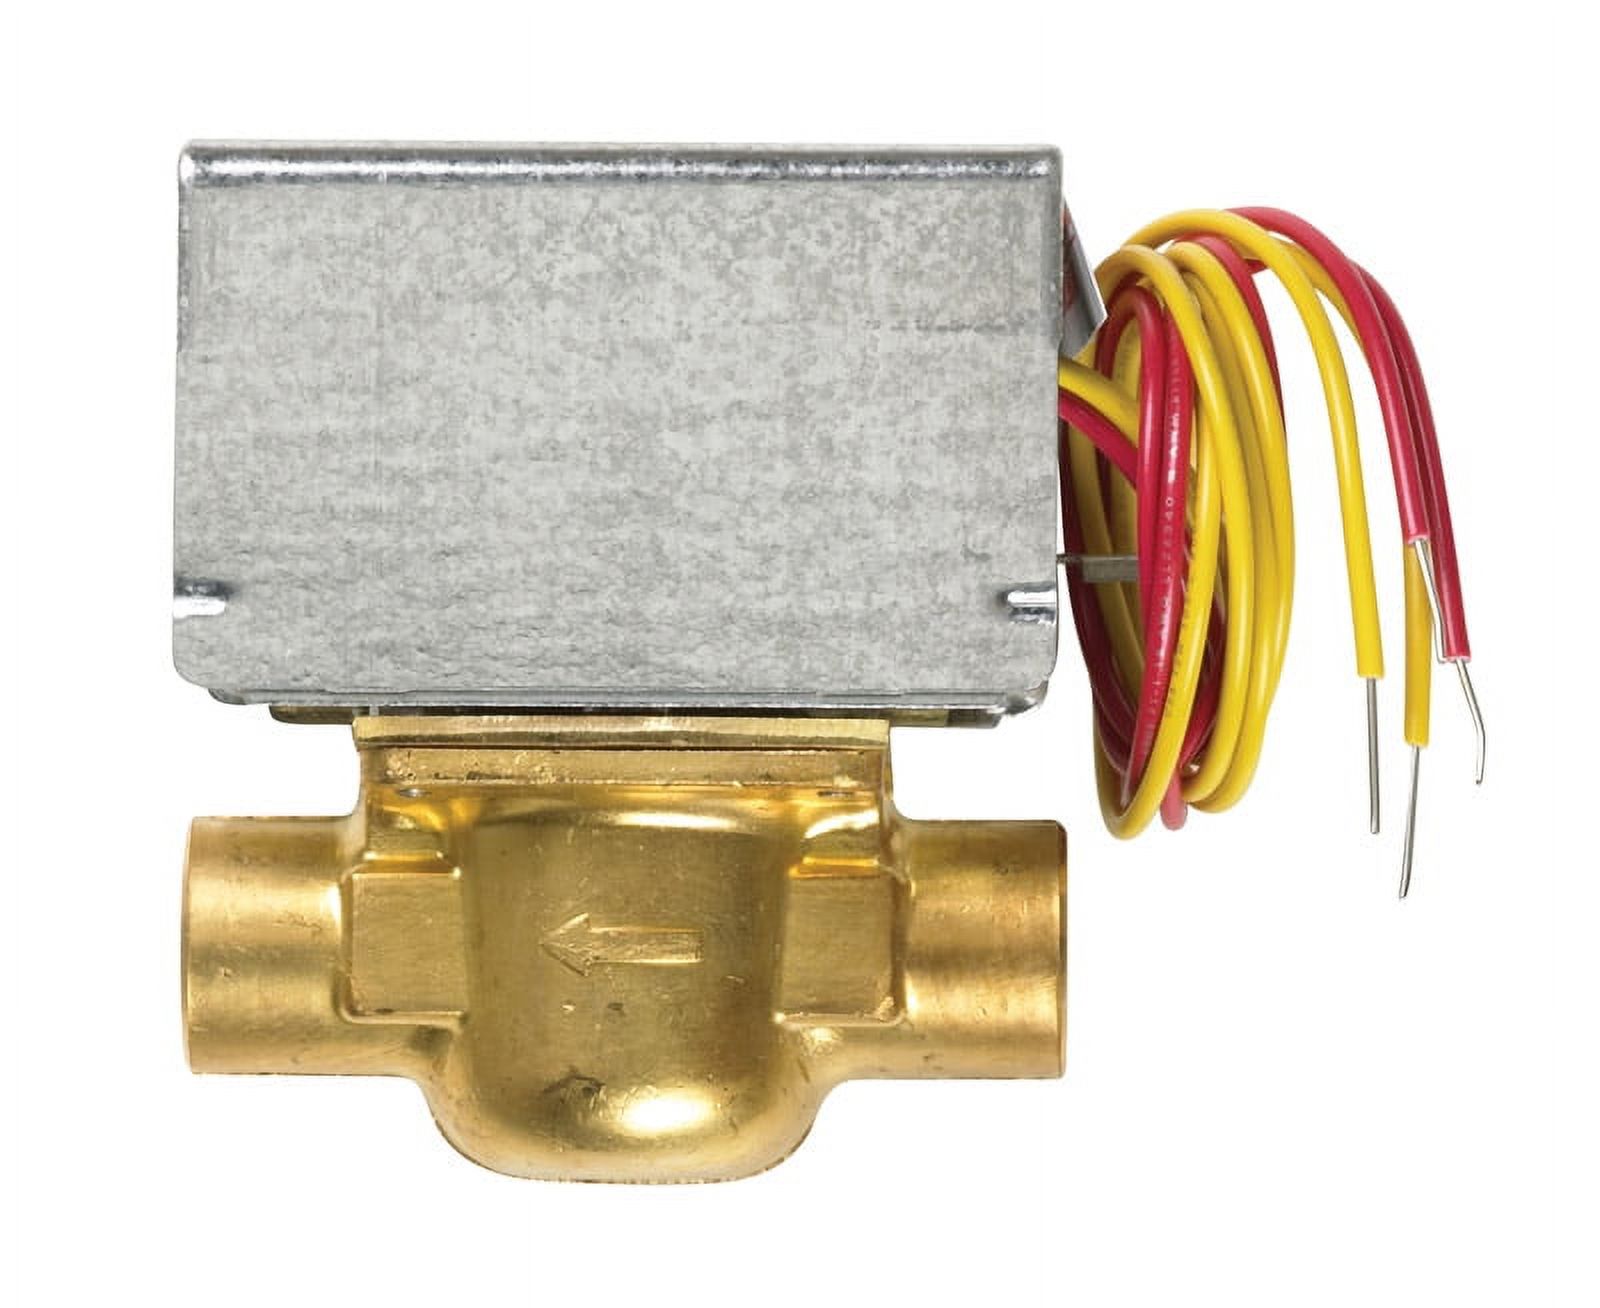 Honeywell 0.8 in. Stainless Steel Zone Valve - image 1 of 2